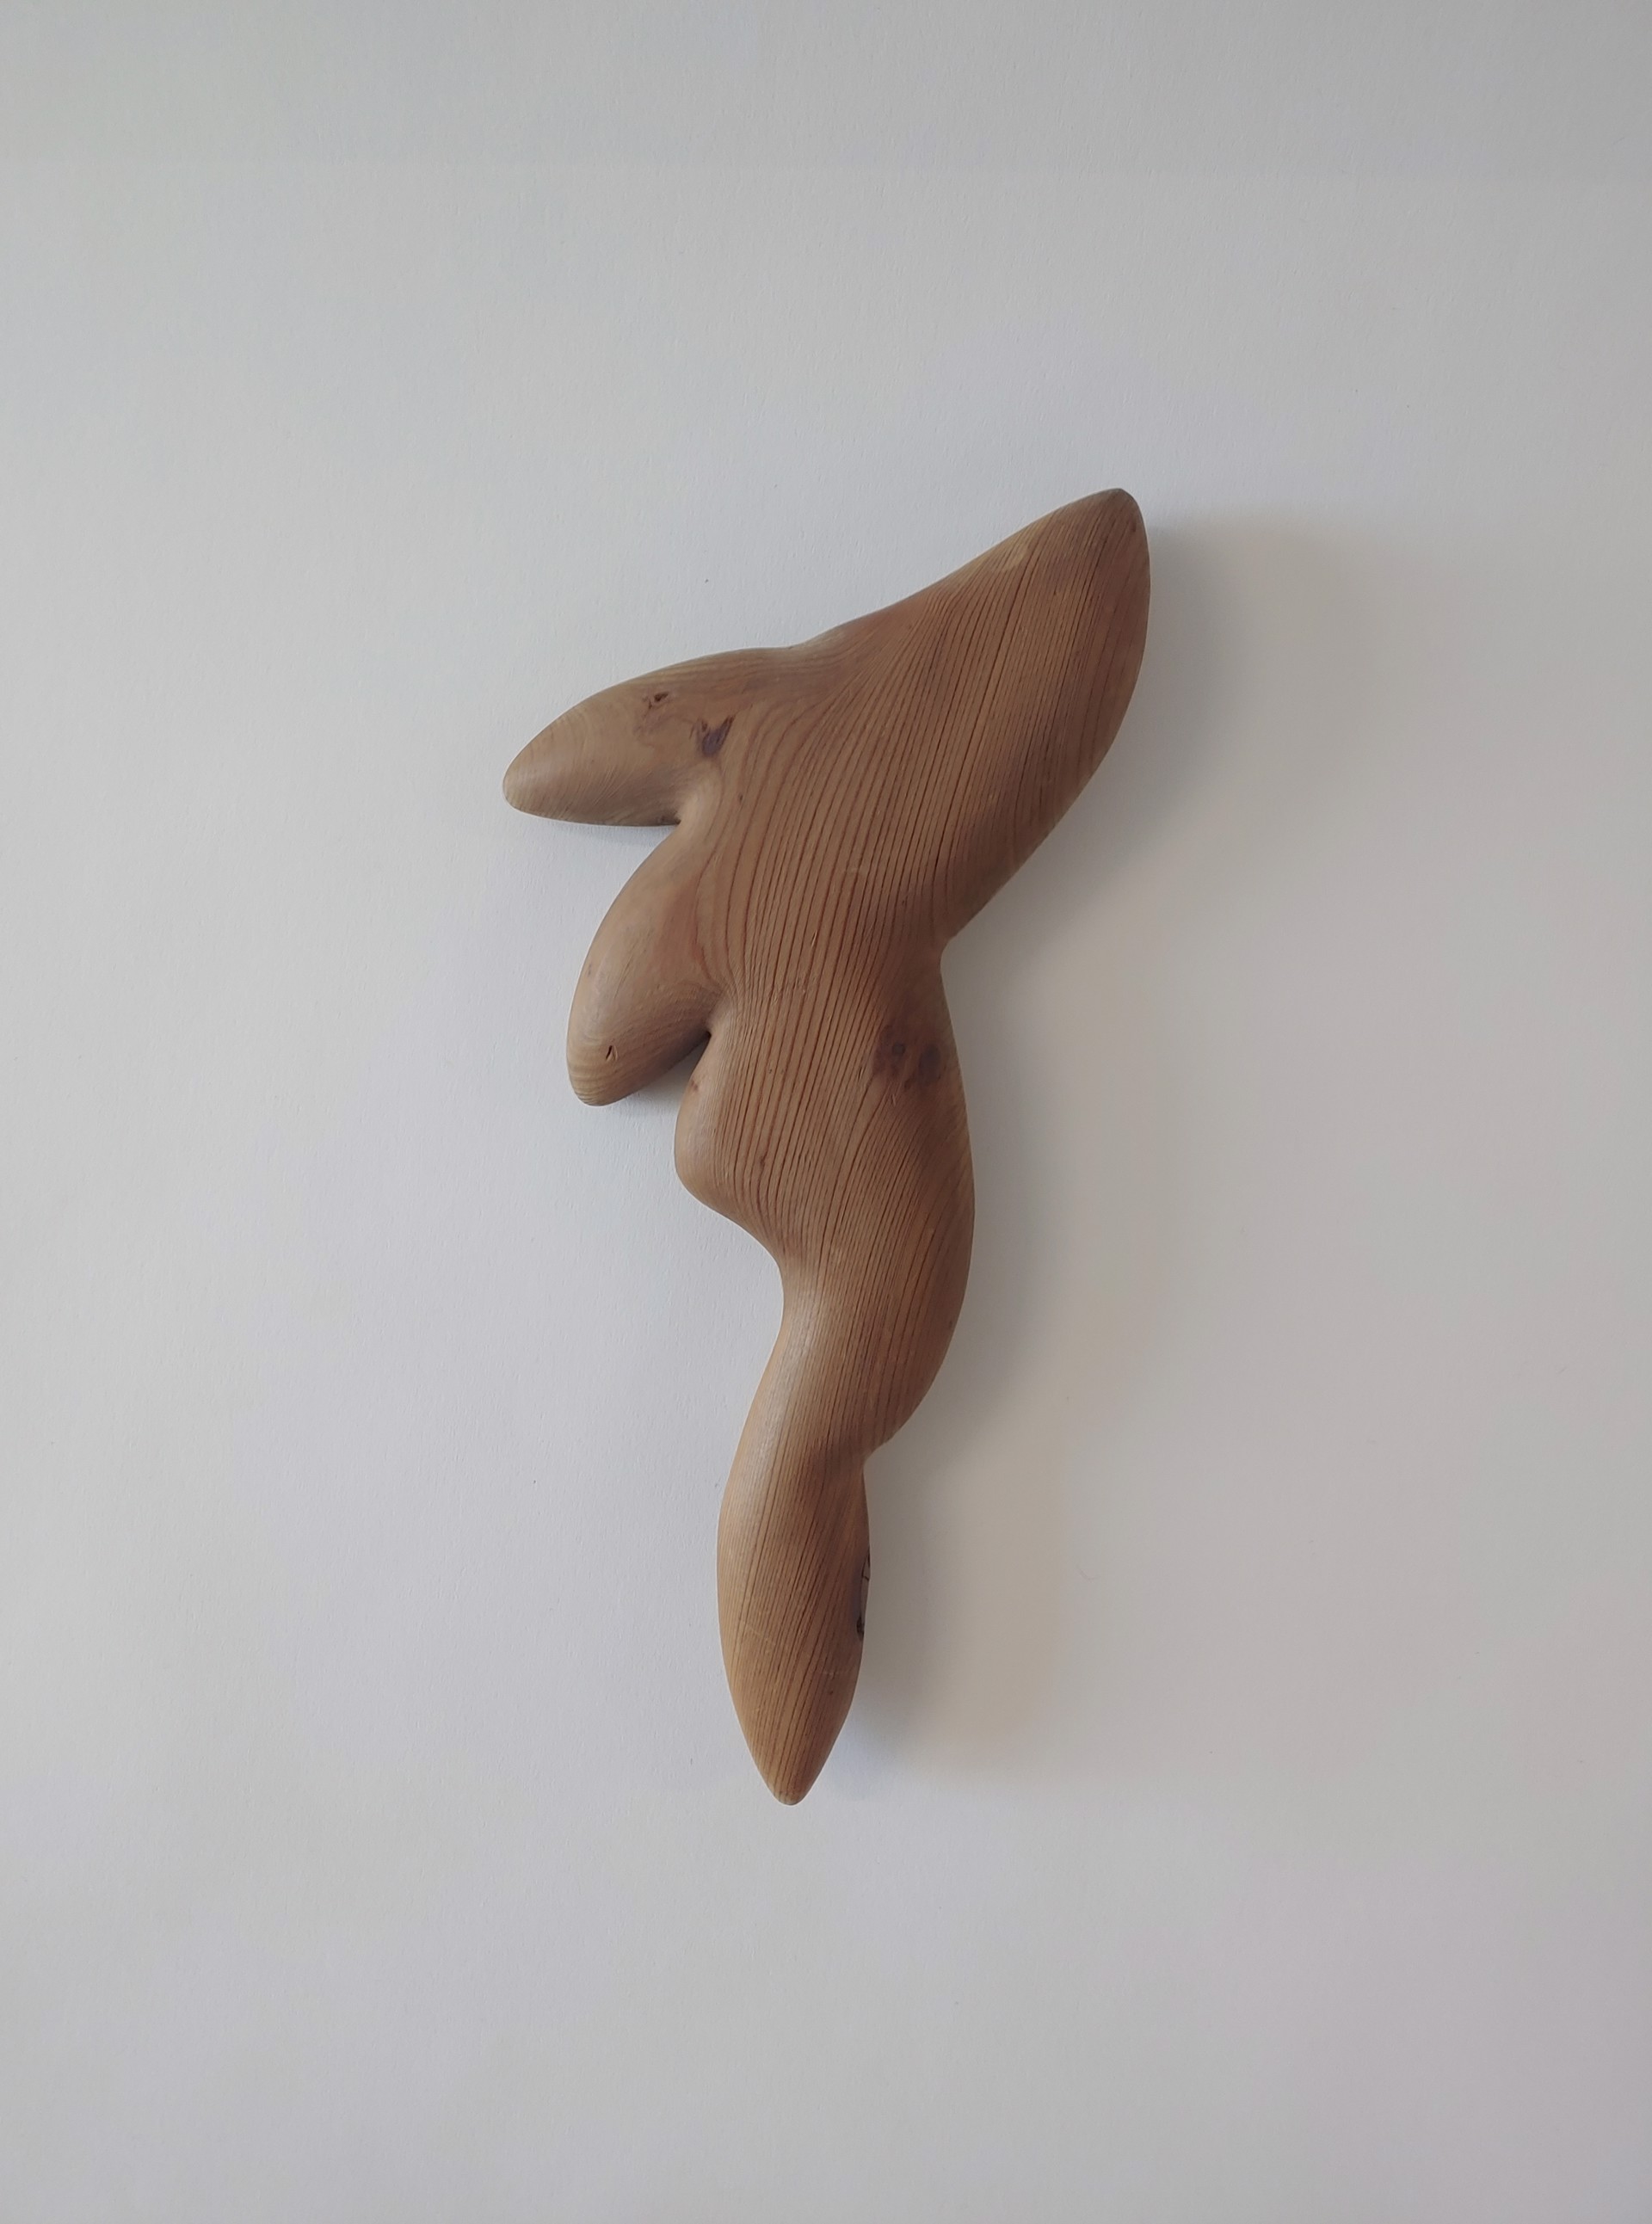 Abstract  #3 - Wood Sculpture, unfinished by David Amdur